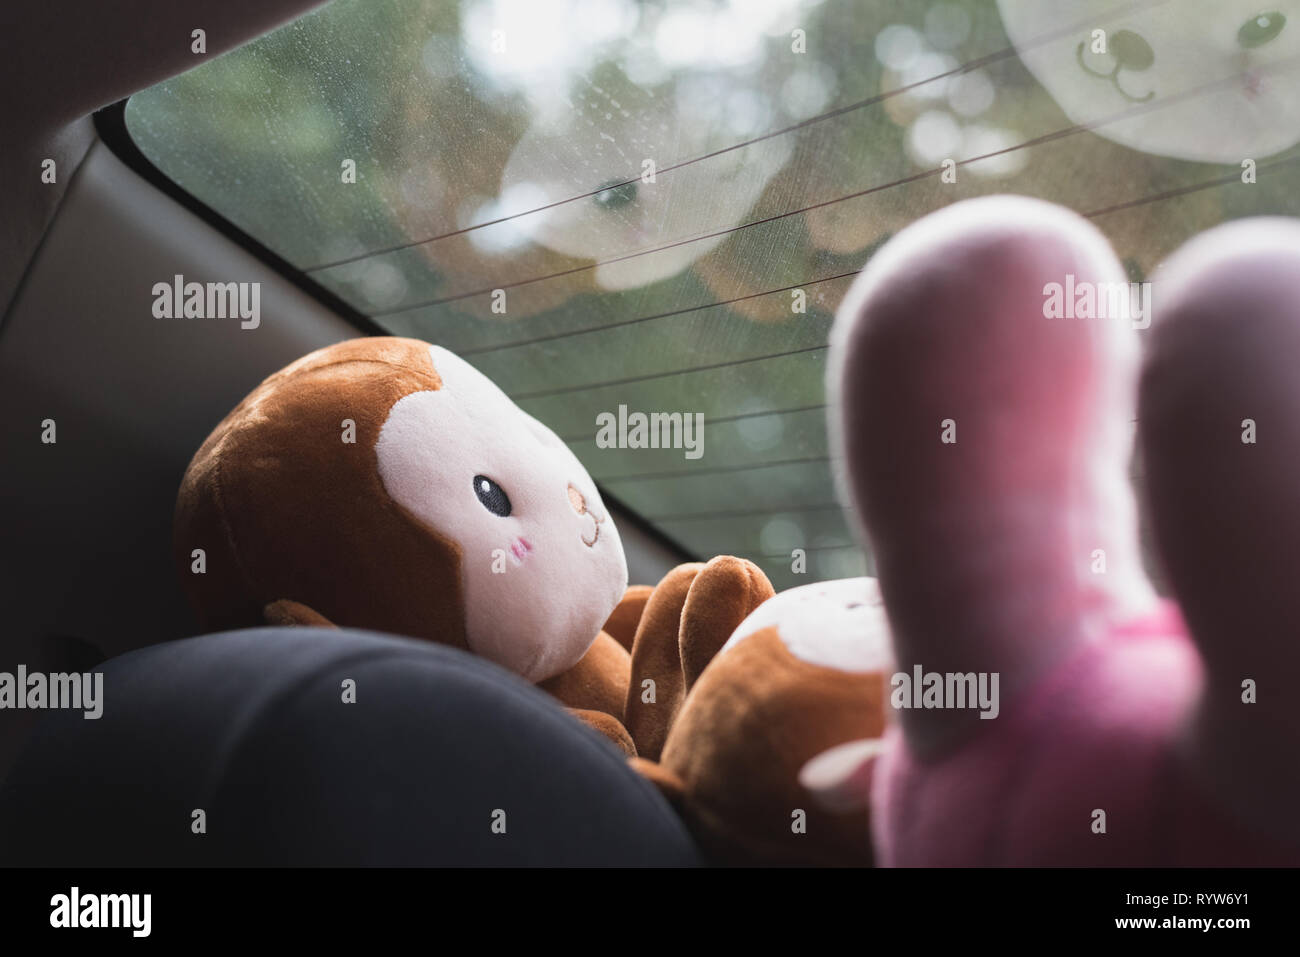 Plush toys in front of the rear window of a car. Reflections of the smiling toy muzzle. The concept of a car trip with children. Stock Photo